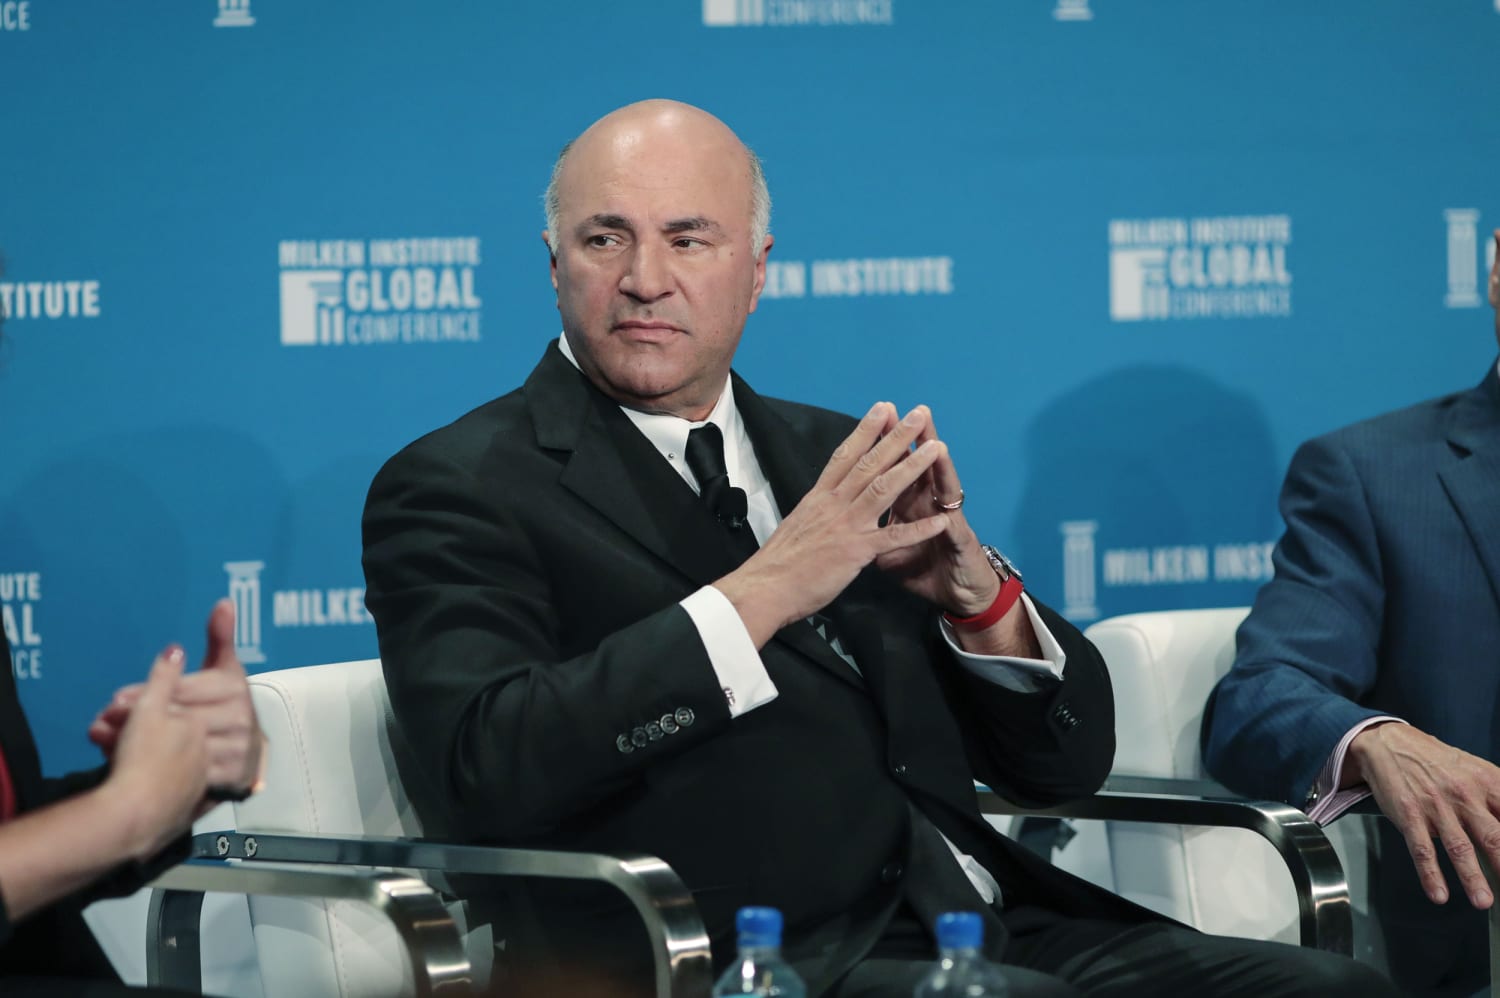 Shark Tank' star Kevin O'Leary says he's 'devastated' by boating accident  that killed two people